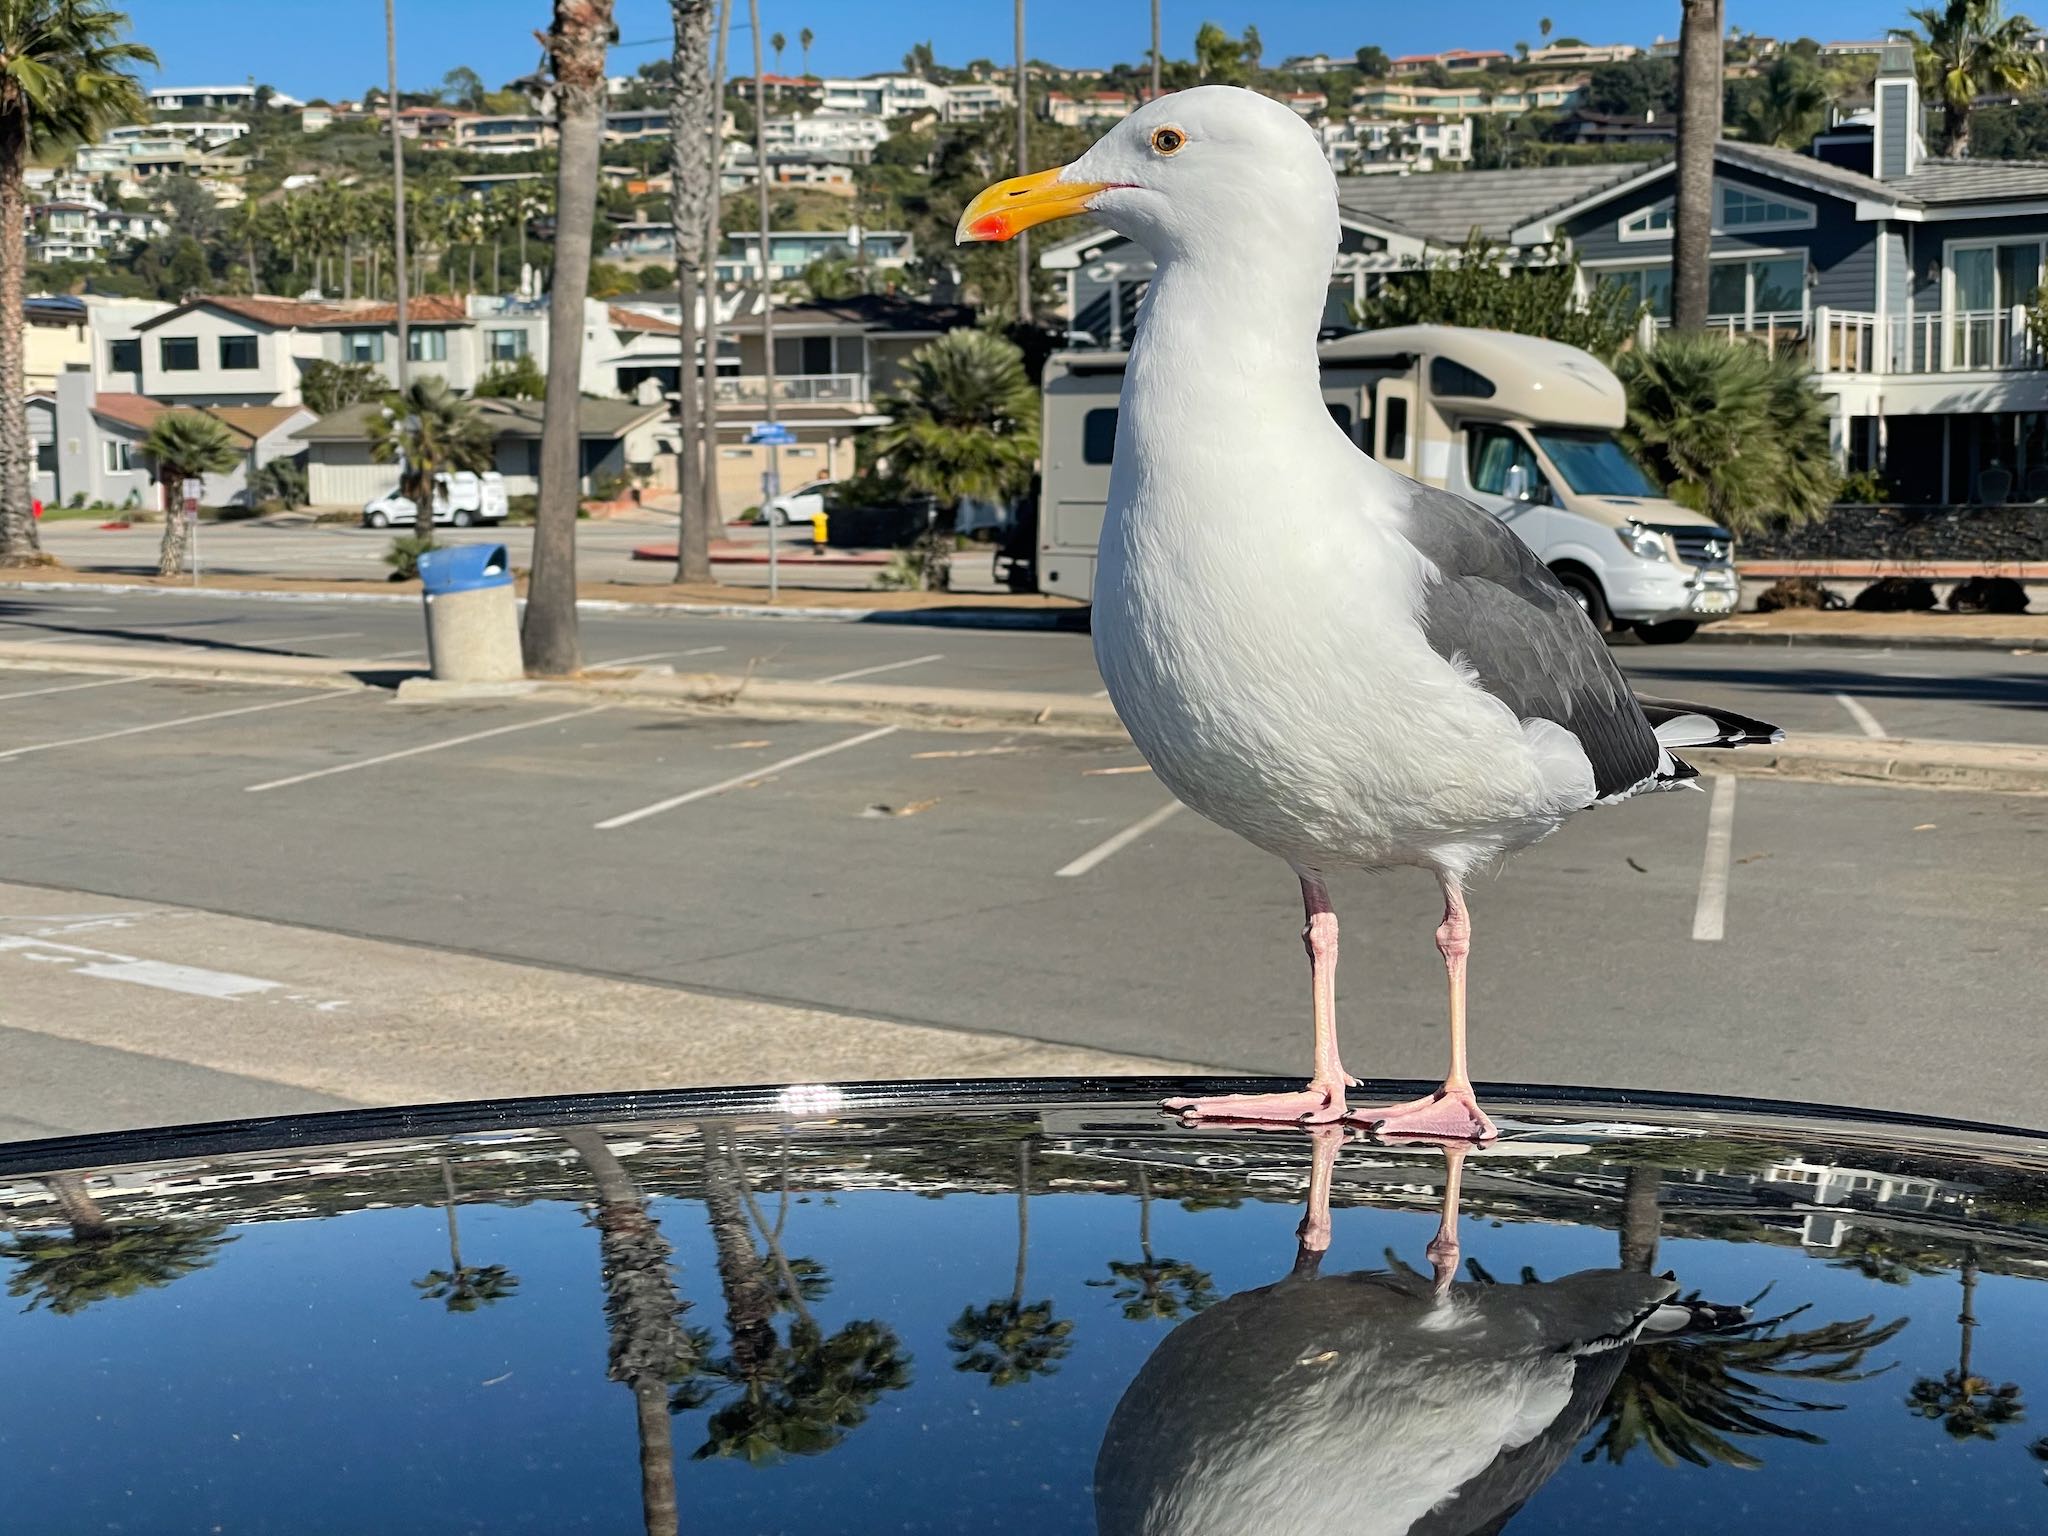 Gull in La Jolla - doesn't have much to do with innovation but I like how brazen the little guy is